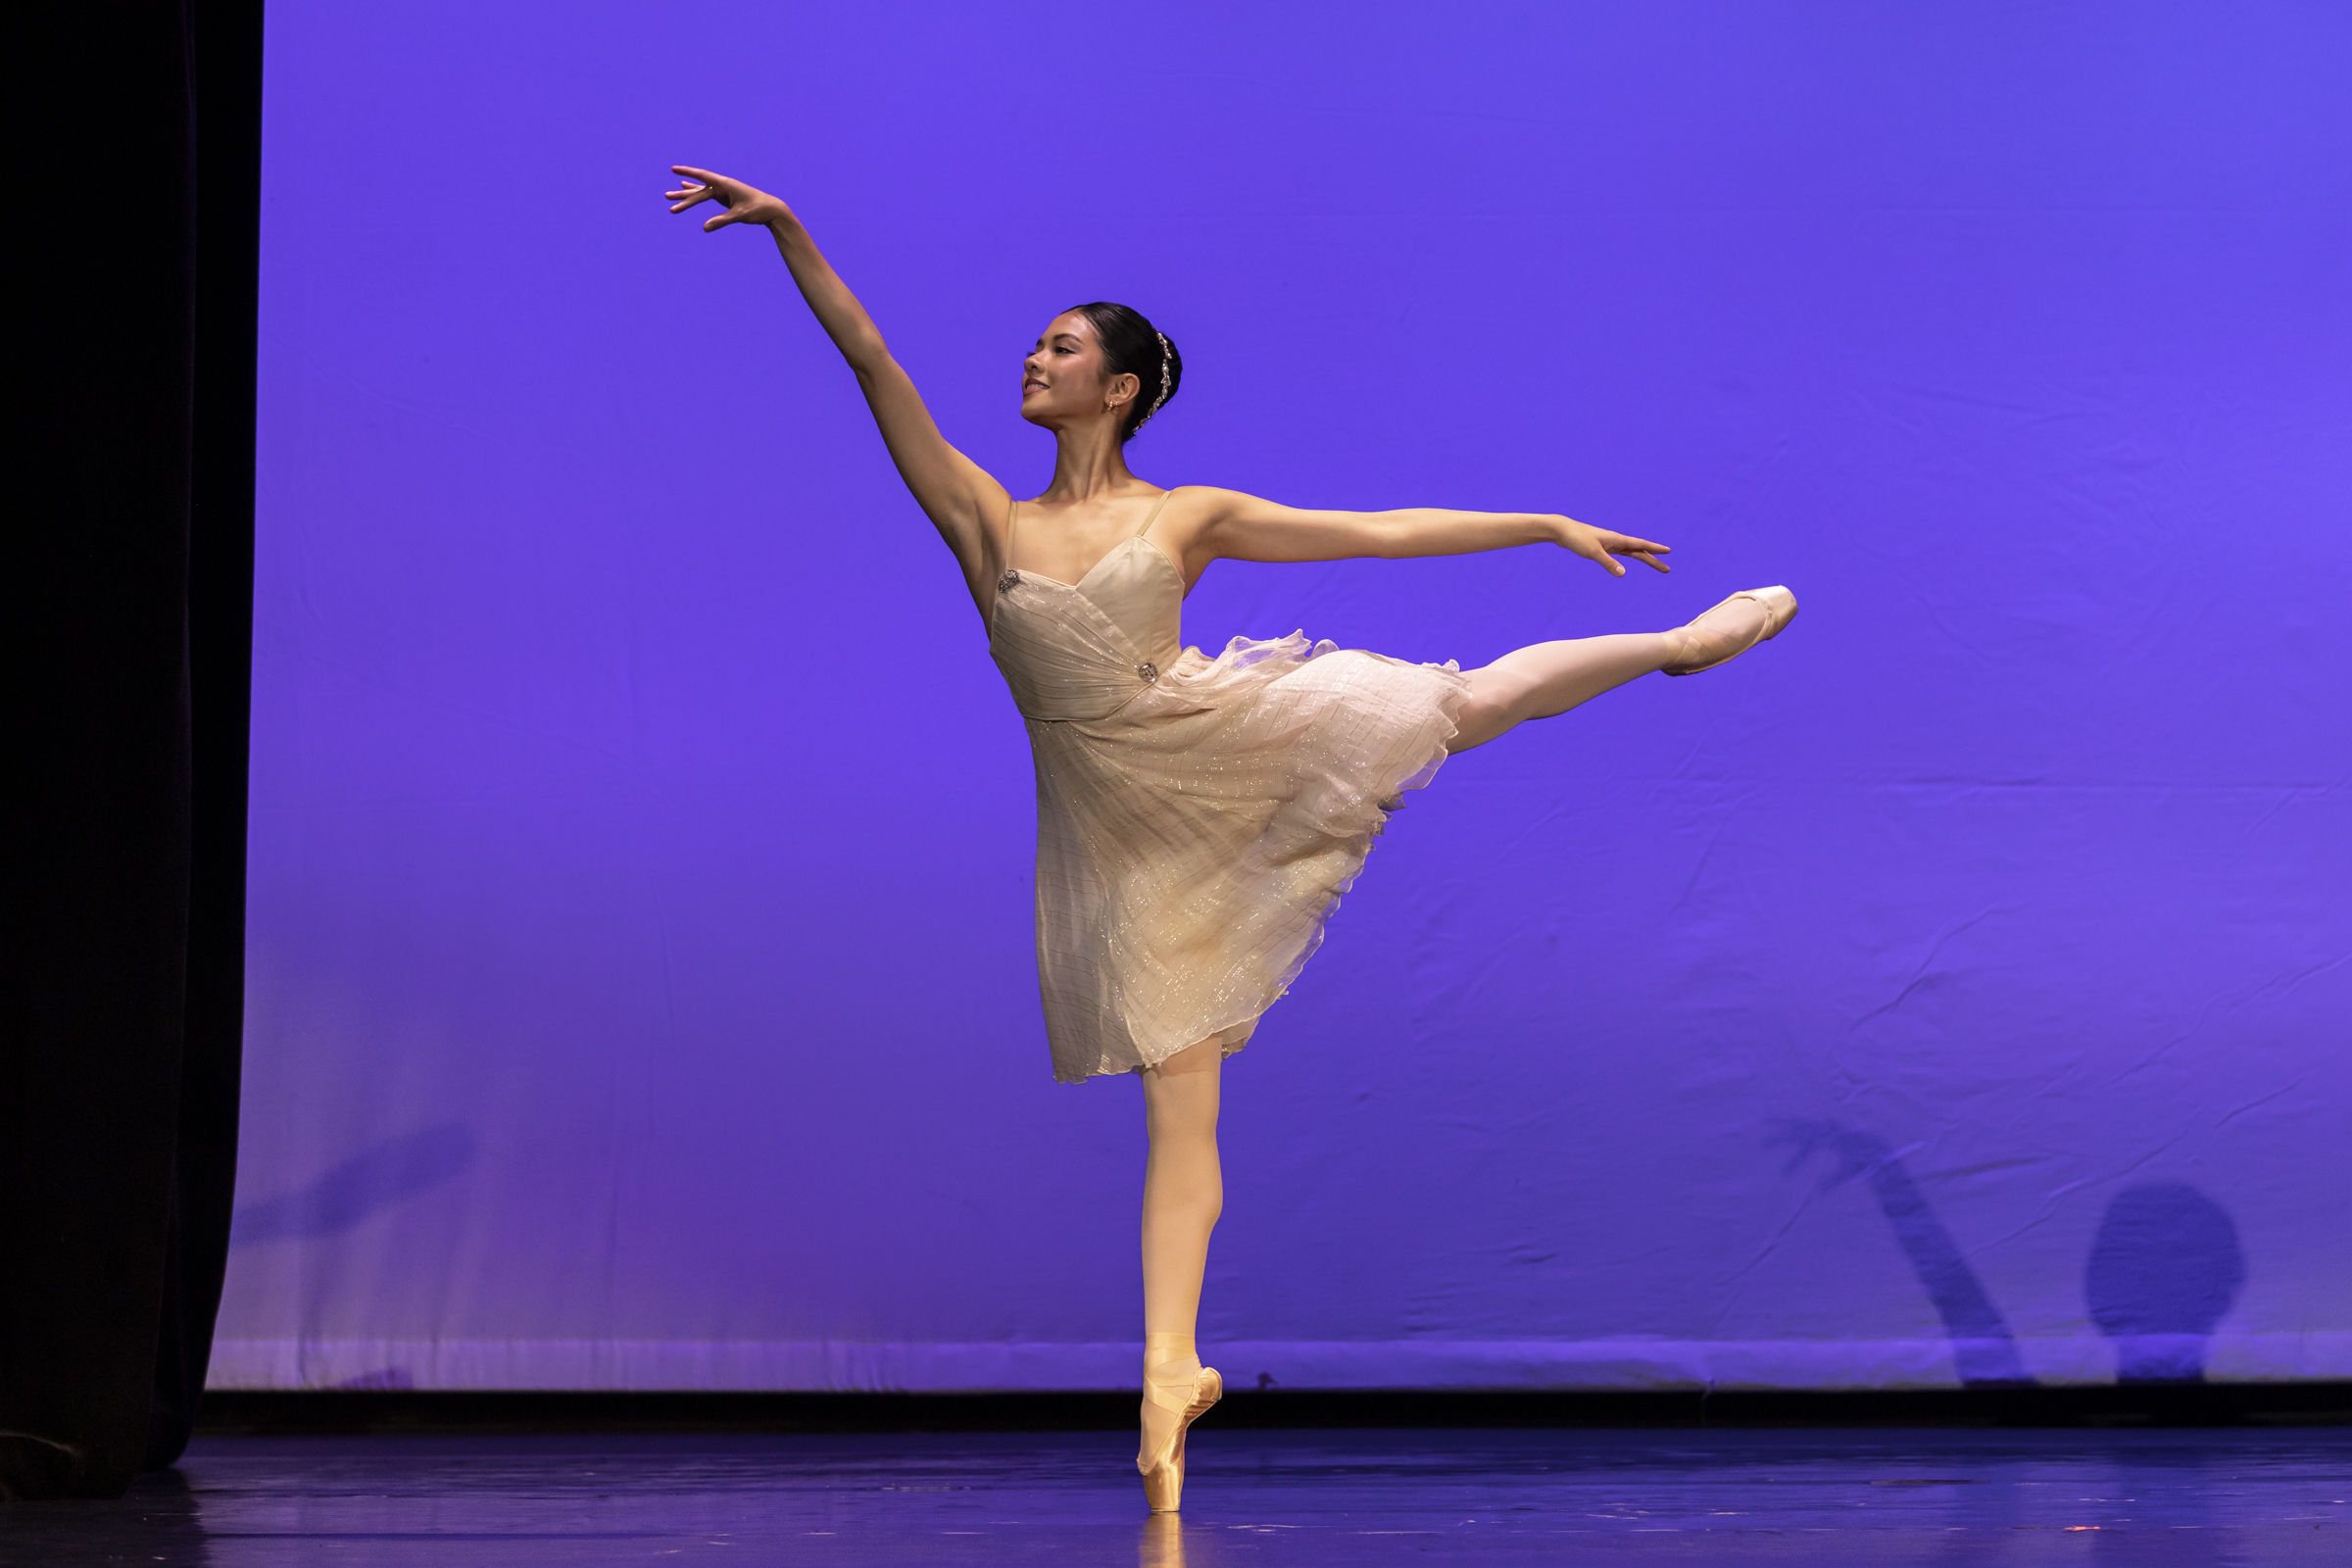 Mikaela Santos performs a variation from "La Talisman." She does an arabesque on pointe in a cream-colored, flowing dress.